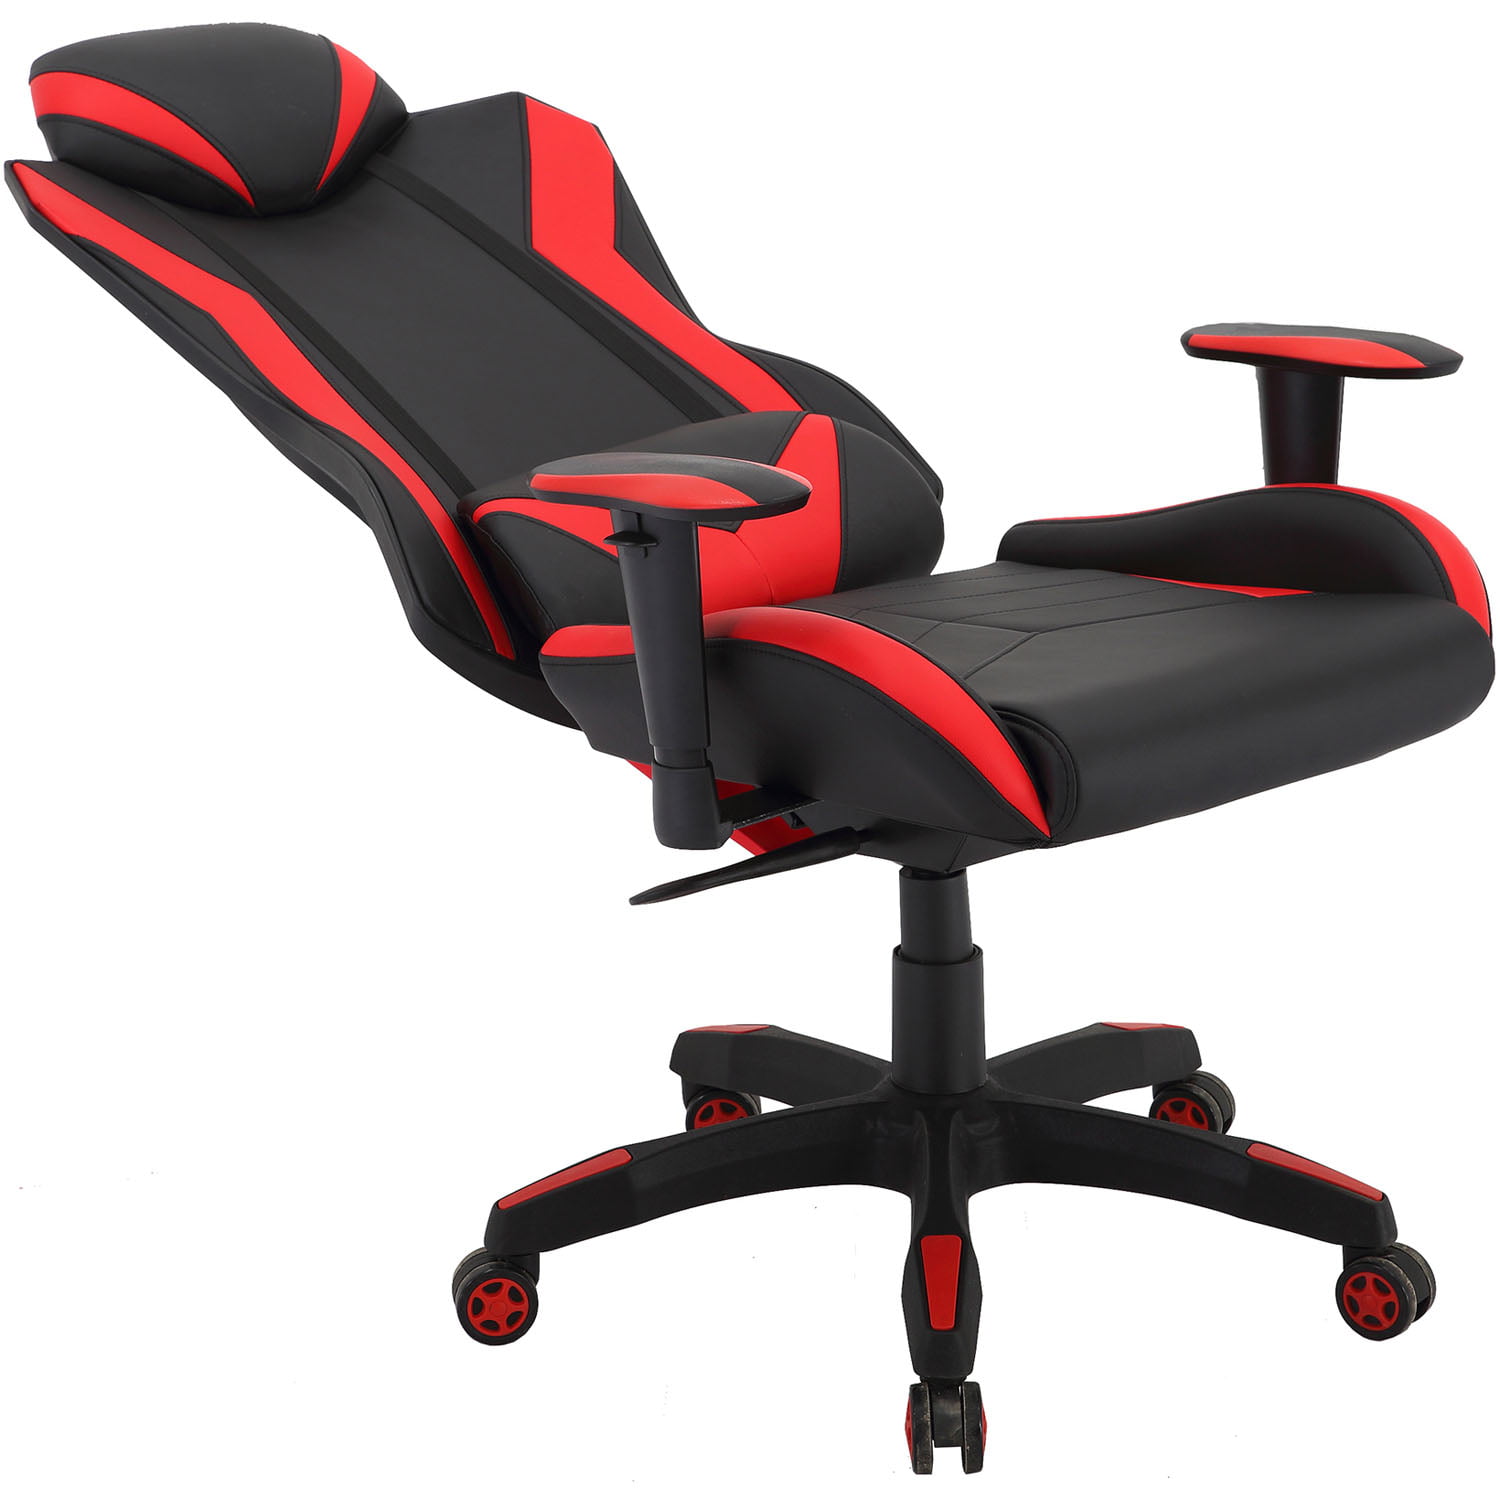 Commando Ergonomic High-Back Gaming Chair in and Red with Adjustable Gas Lift Seating and Lumbar Support Walmart.com